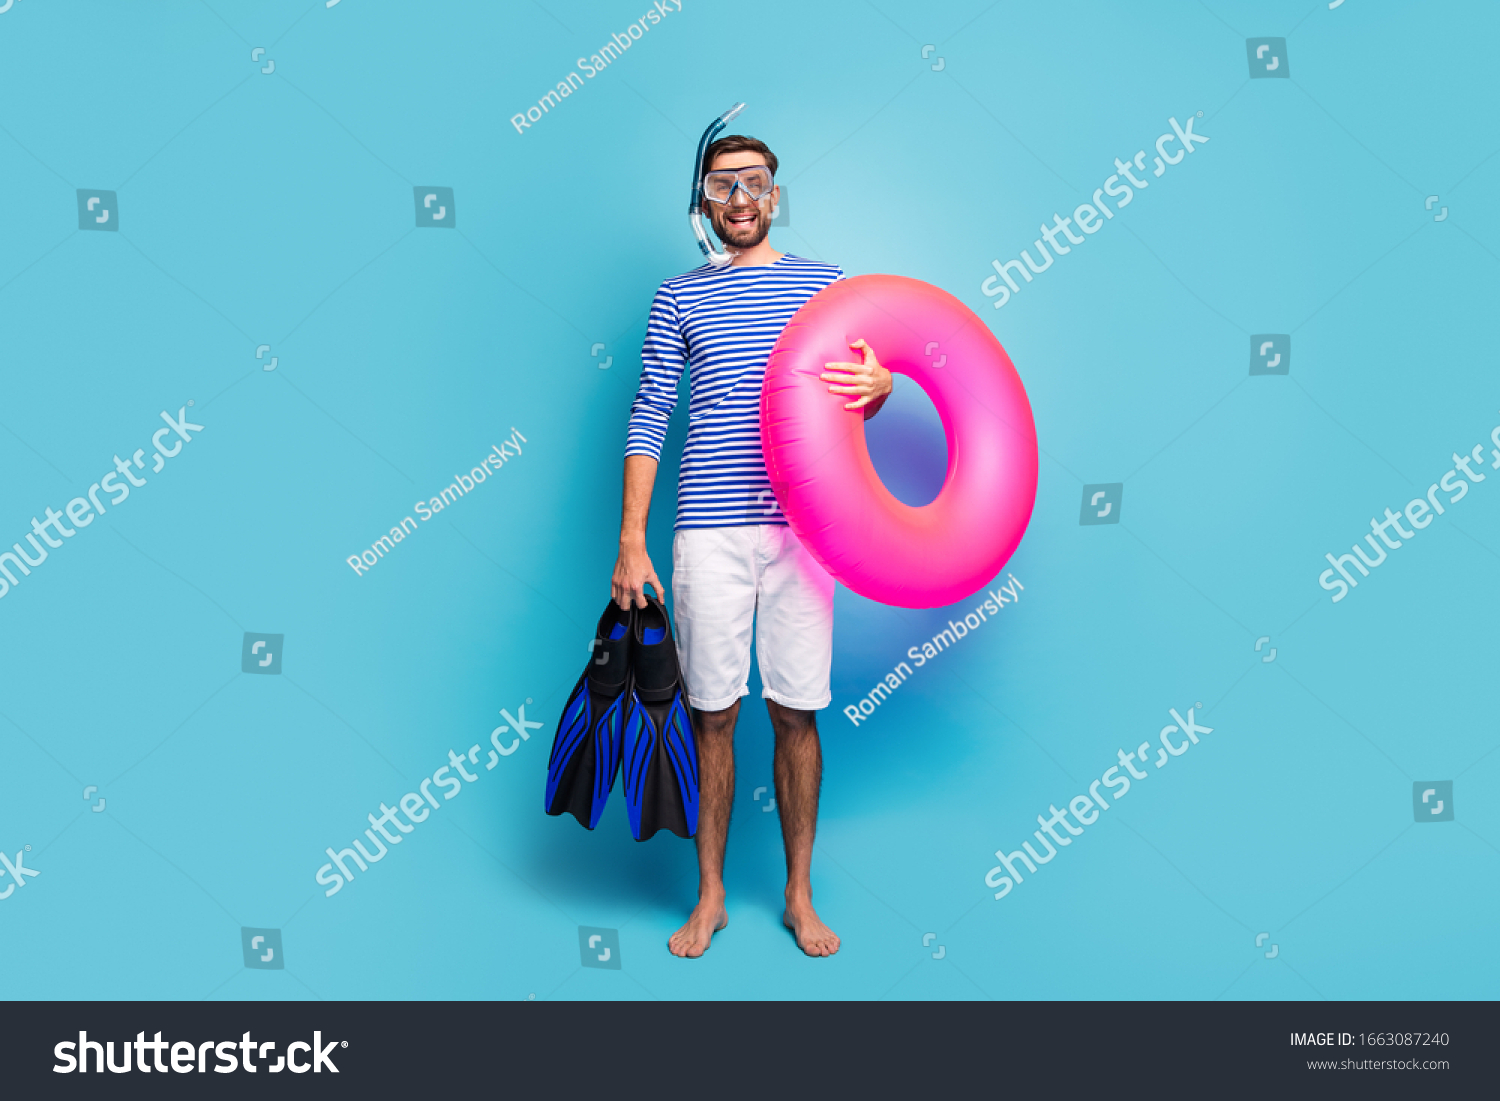 Full body photo of funny excited guy tourist swimmer hold underwater mask breathing tube flippers pink lifebuoy wear striped sailor shirt shorts isolated blue color background #1663087240